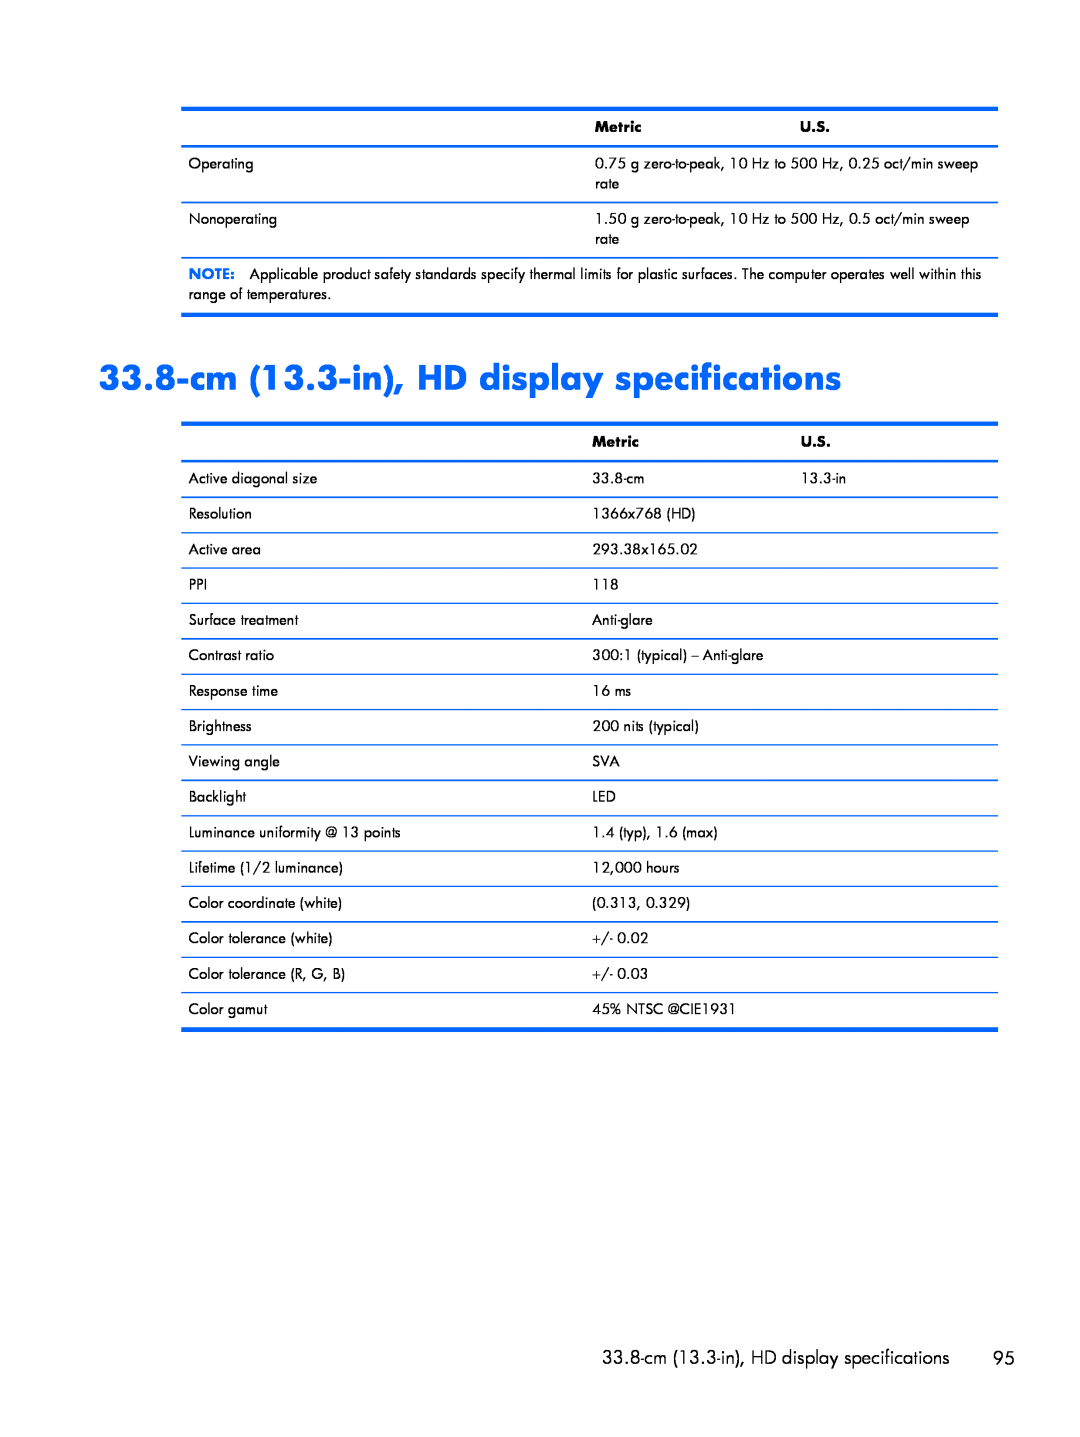 HP 430 G1 E3U85UTABA, 430 G1 E3U87UTABA, 430 G1 E3U93UTABA manual 33.8-cm 13.3-in, HD display specifications, Metric 